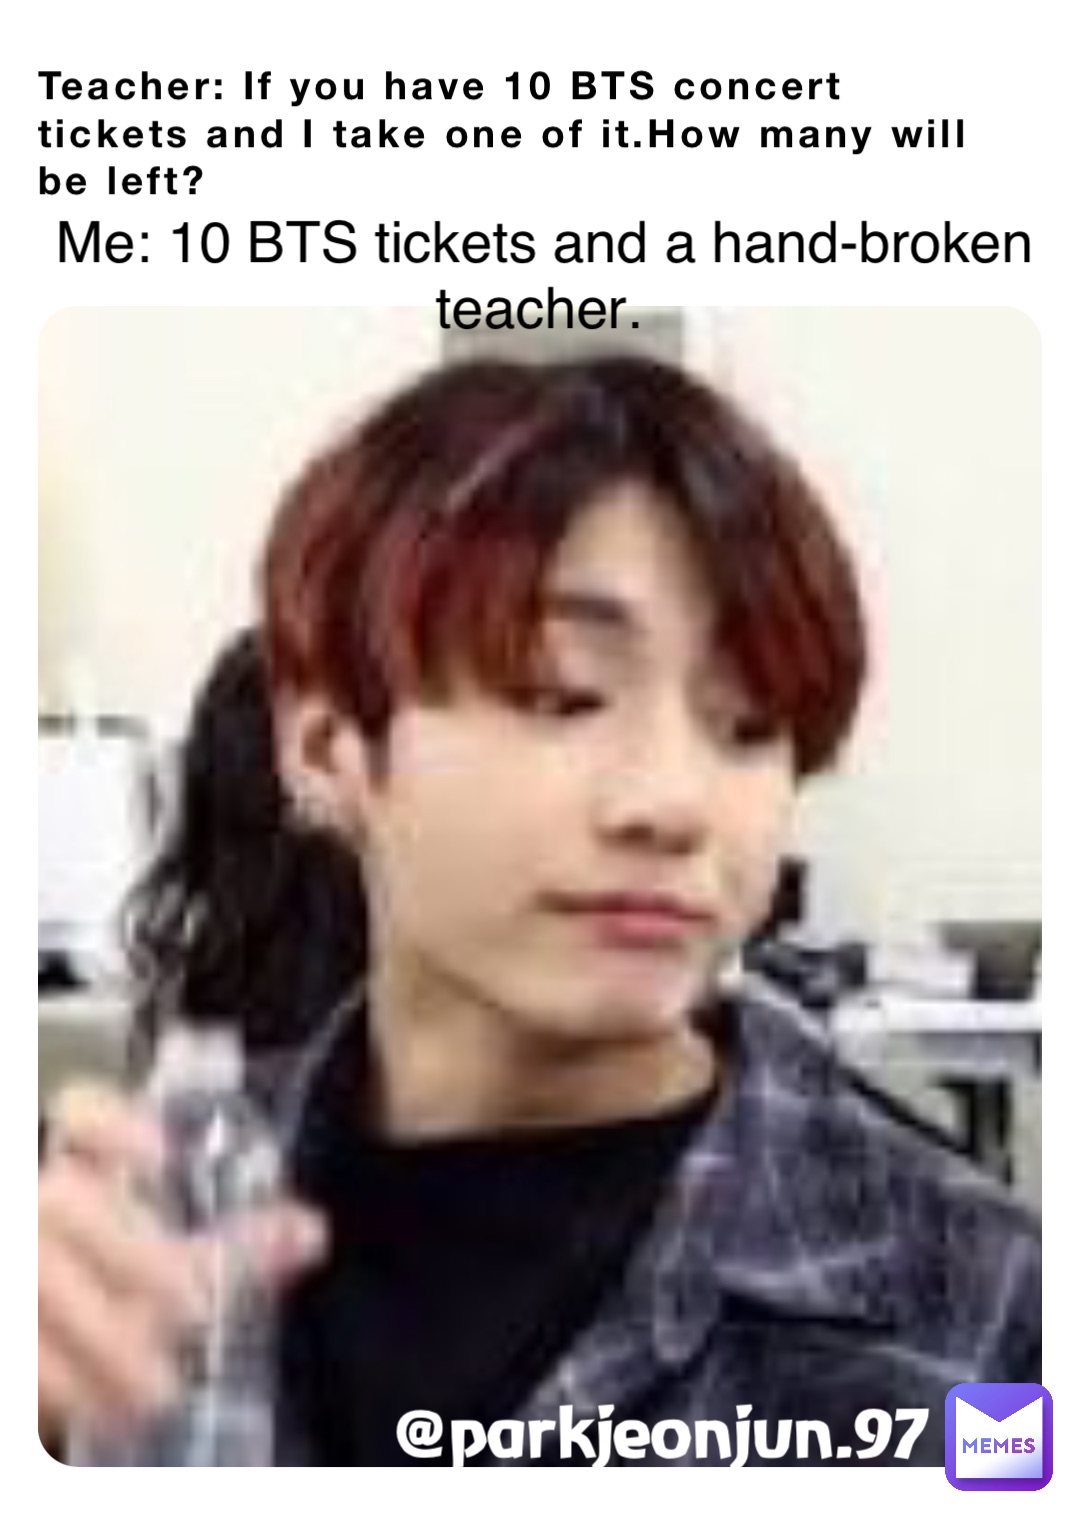 Teacher: If you have 10 BTS concert tickets and I take one of it.How many will be left? Me: 10 BTS tickets and a hand-broken teacher. @parkjeonjun.97